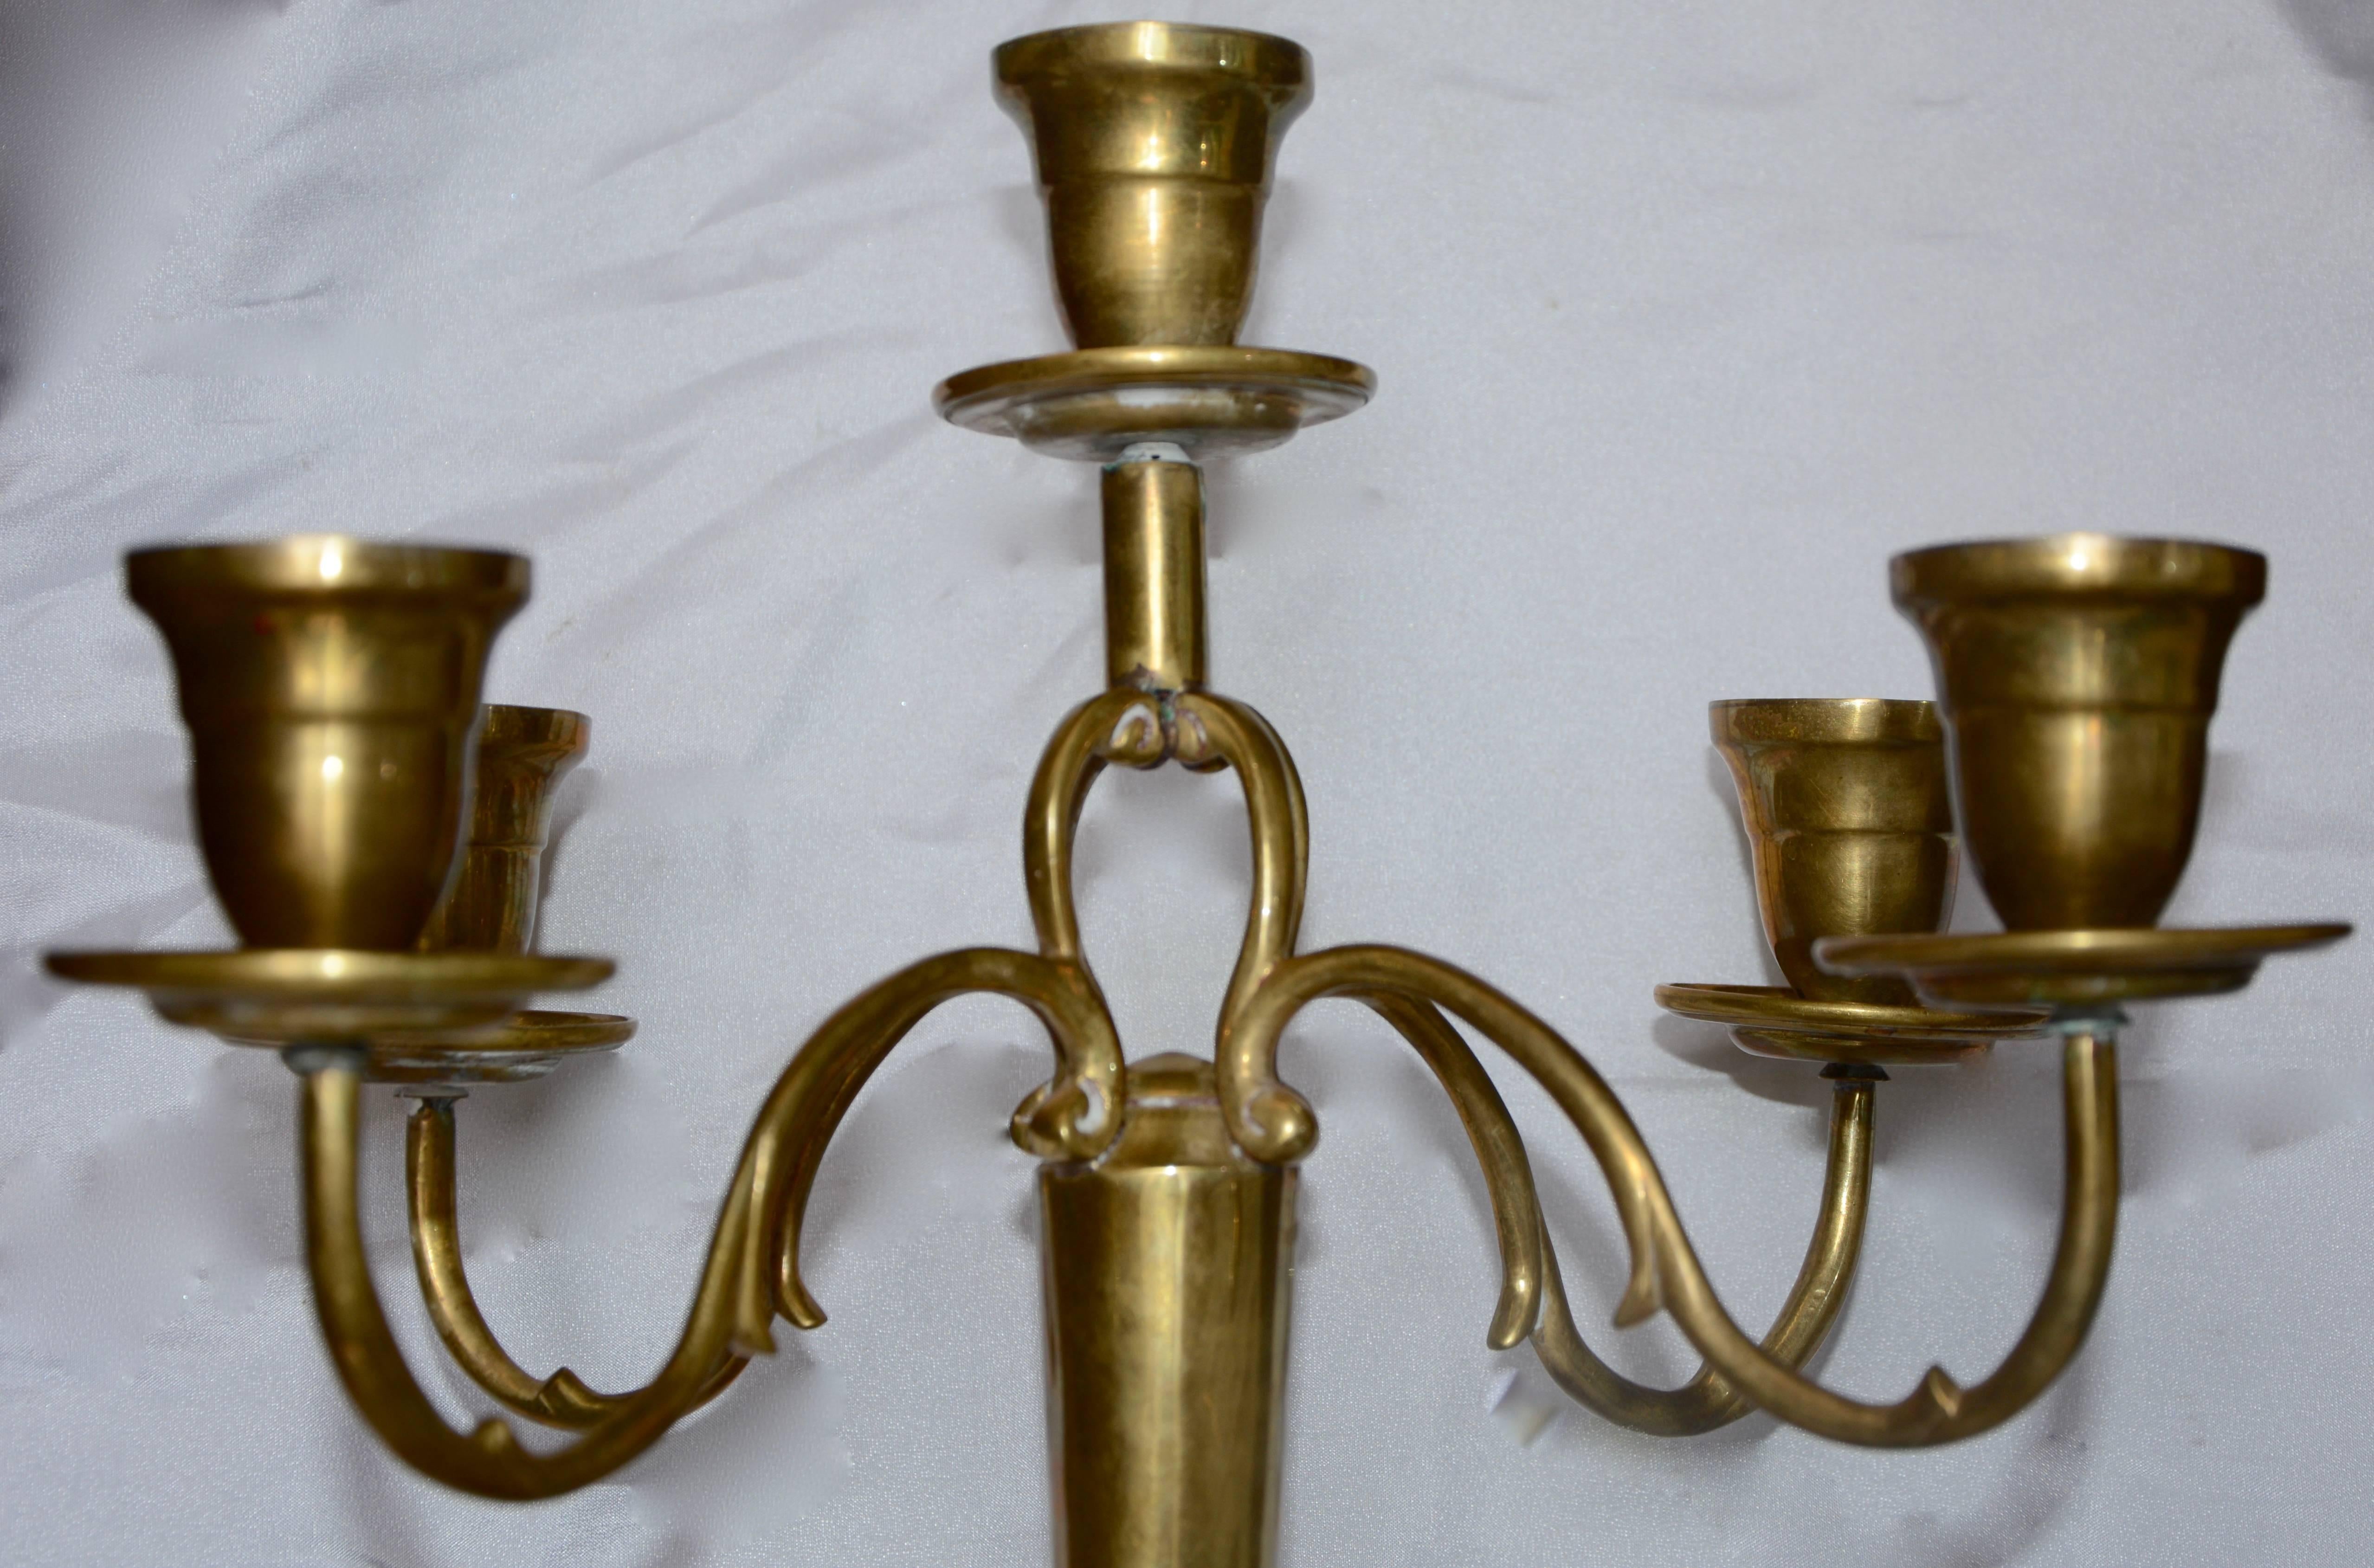 Swirls abound in this cast brass candelabra from India. The substantial base boasts a swirled border and the four arms swirl outward to hold the cups. The centre cup rests atop four scrolled arms. The inside of the cups measure 7/8